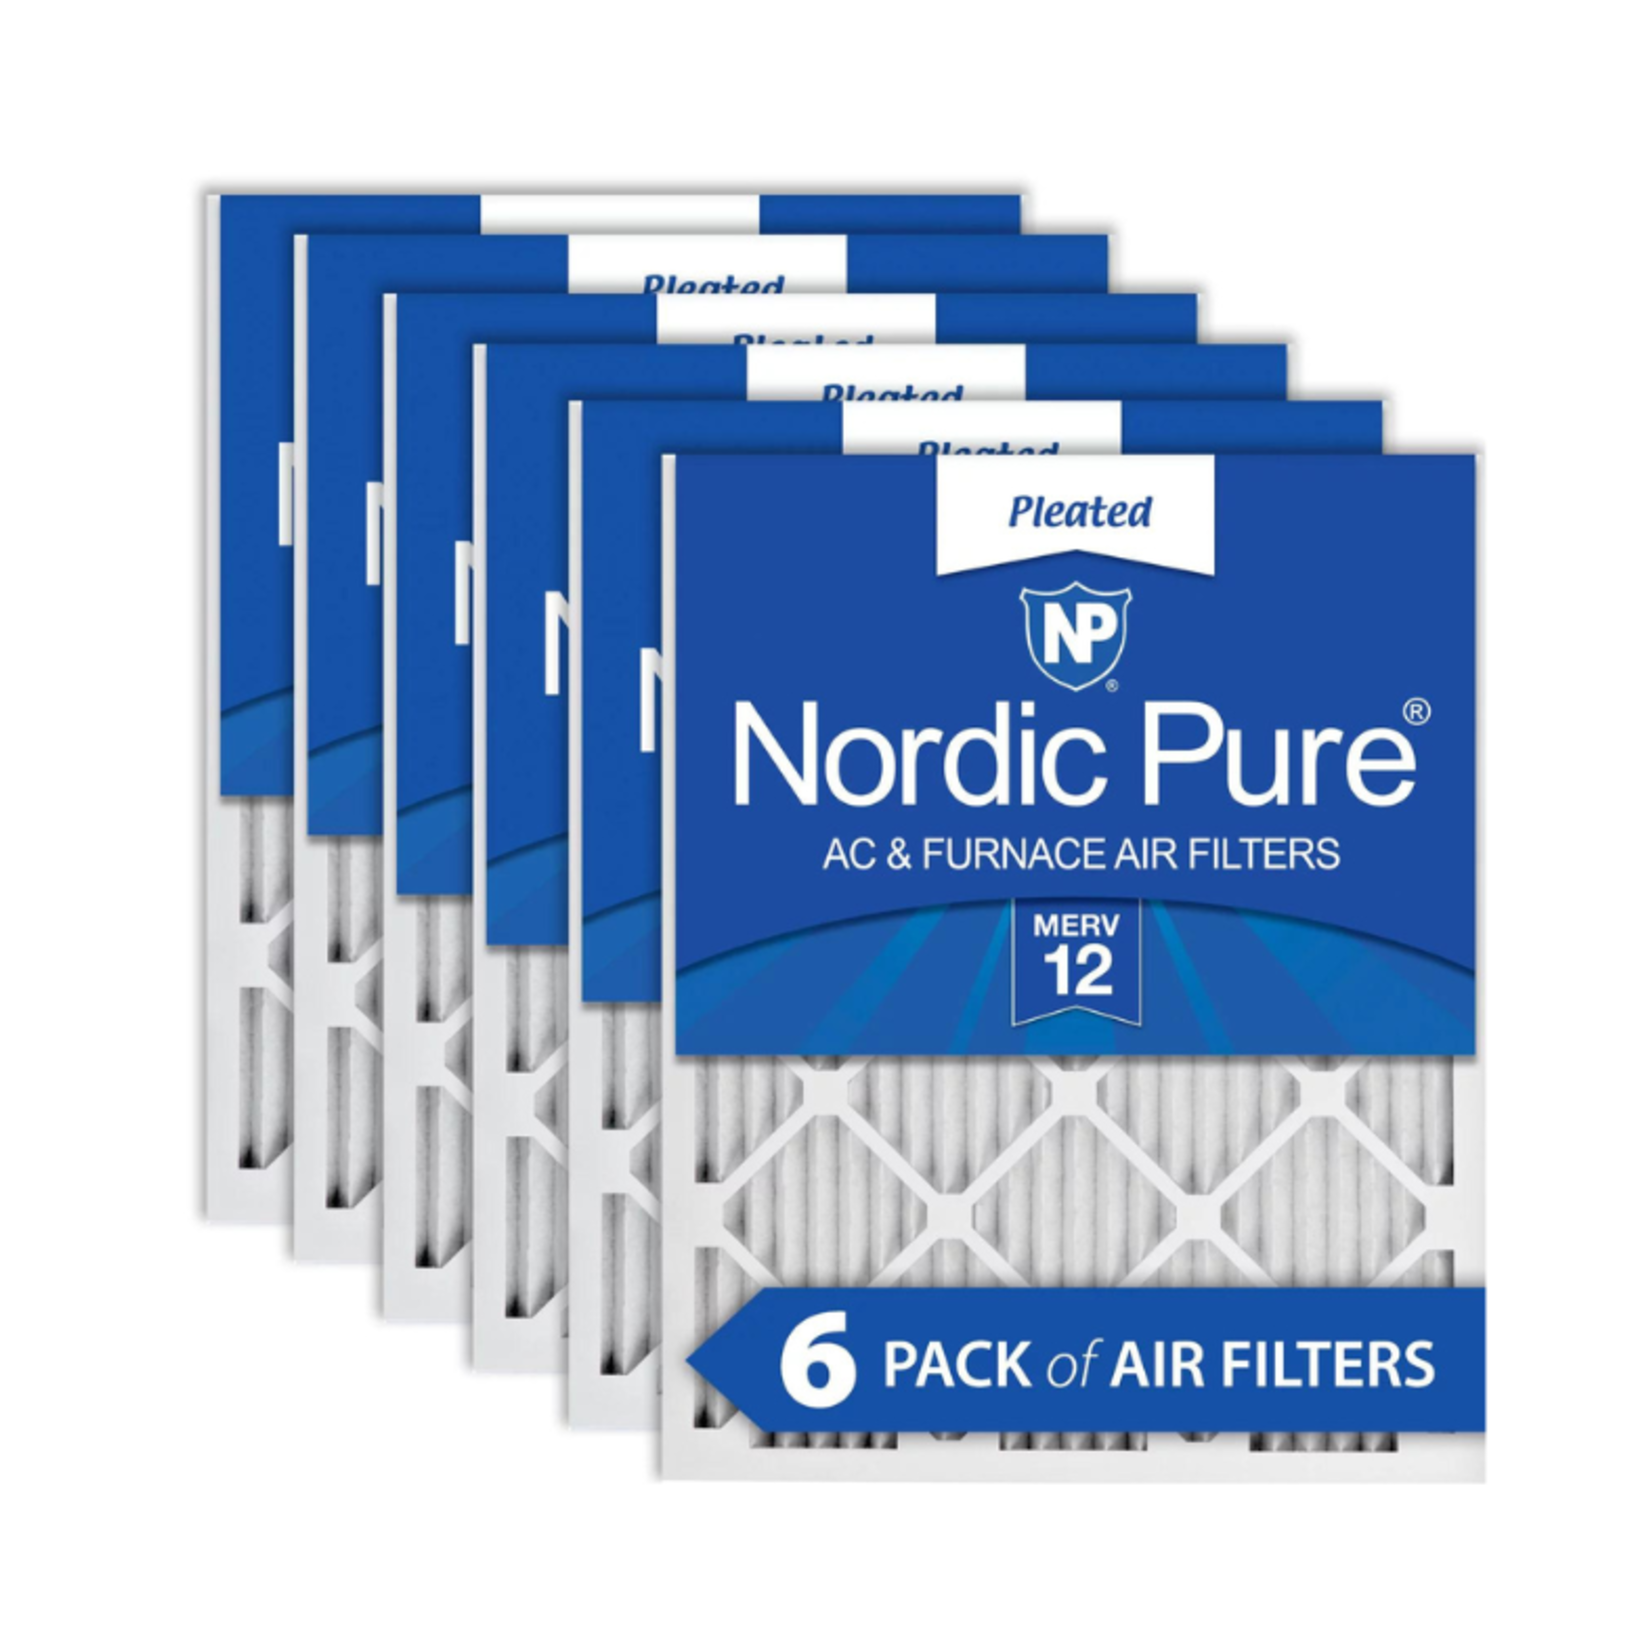 Nordic Pure Pleated Air Filters- 20x20x1 MERV 12- 6 Pack